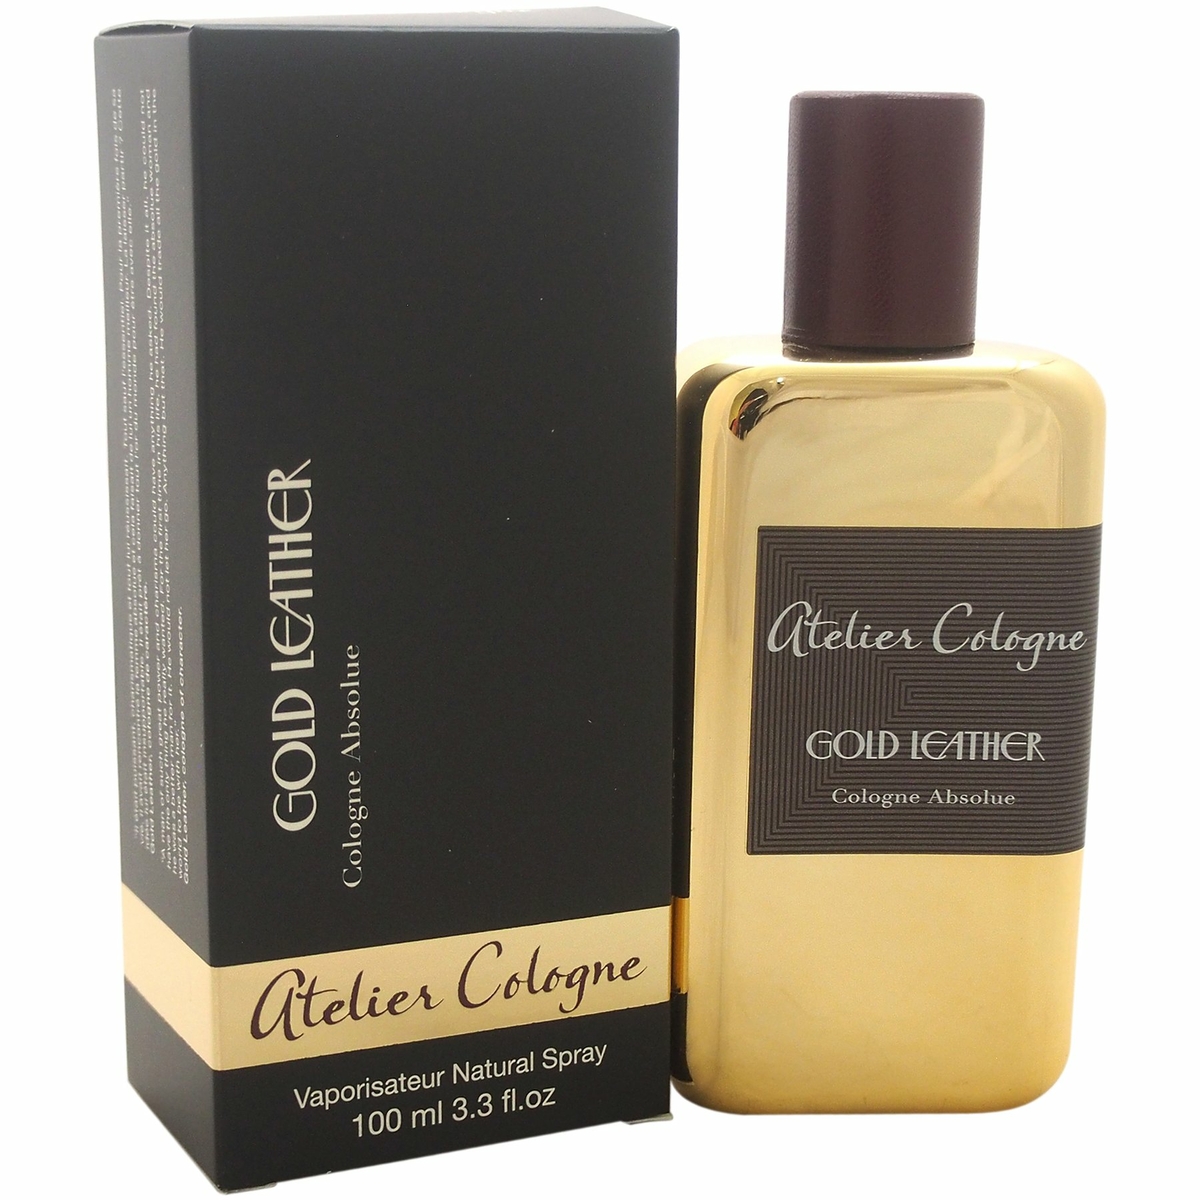 Atelier Cologne Gold Leather #2 в «Globestyle» арт.17769